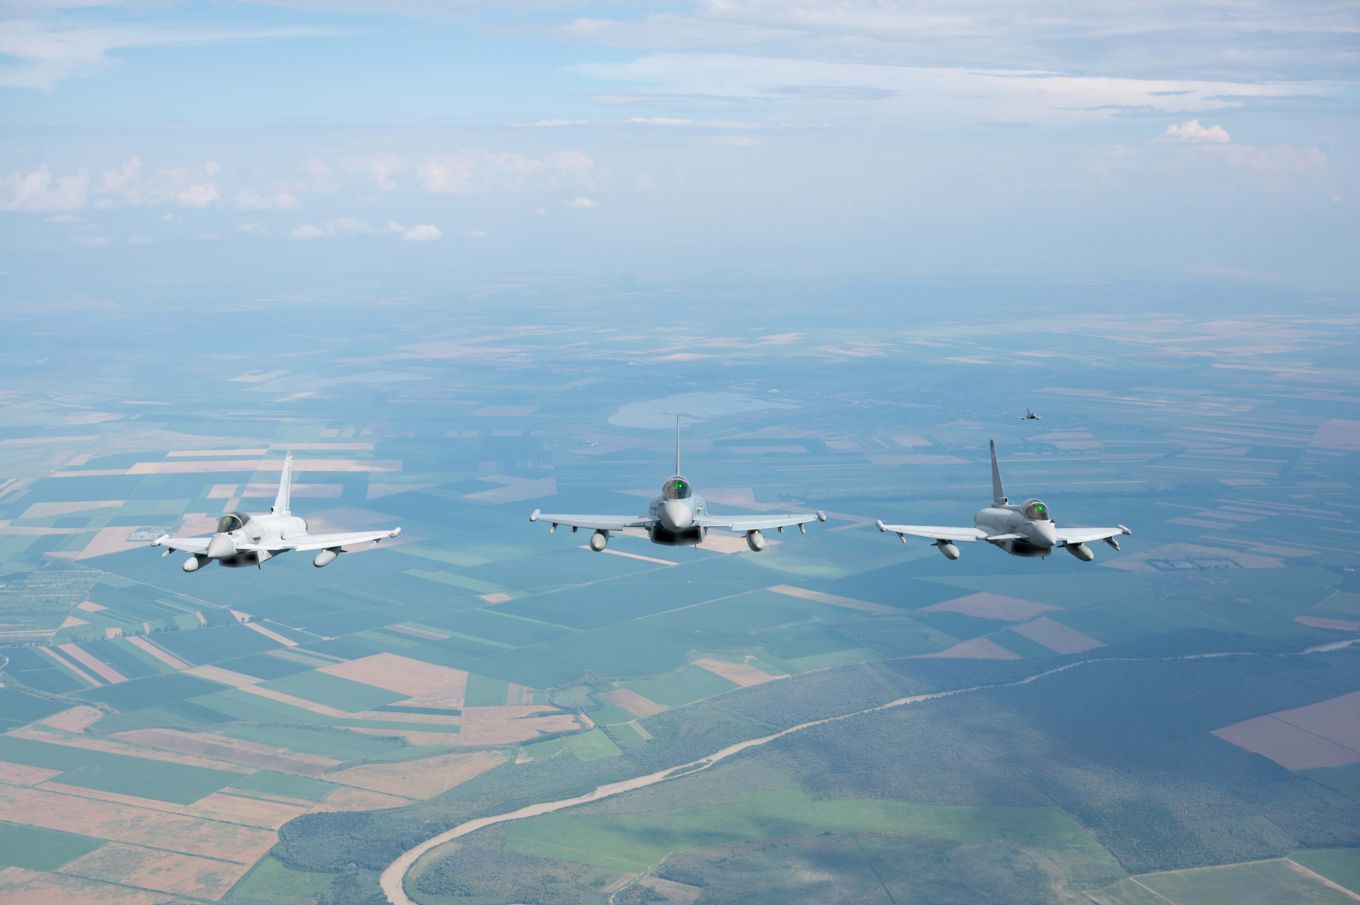 Image shows RAF and German Eurofighter Typhoons flying in formation.